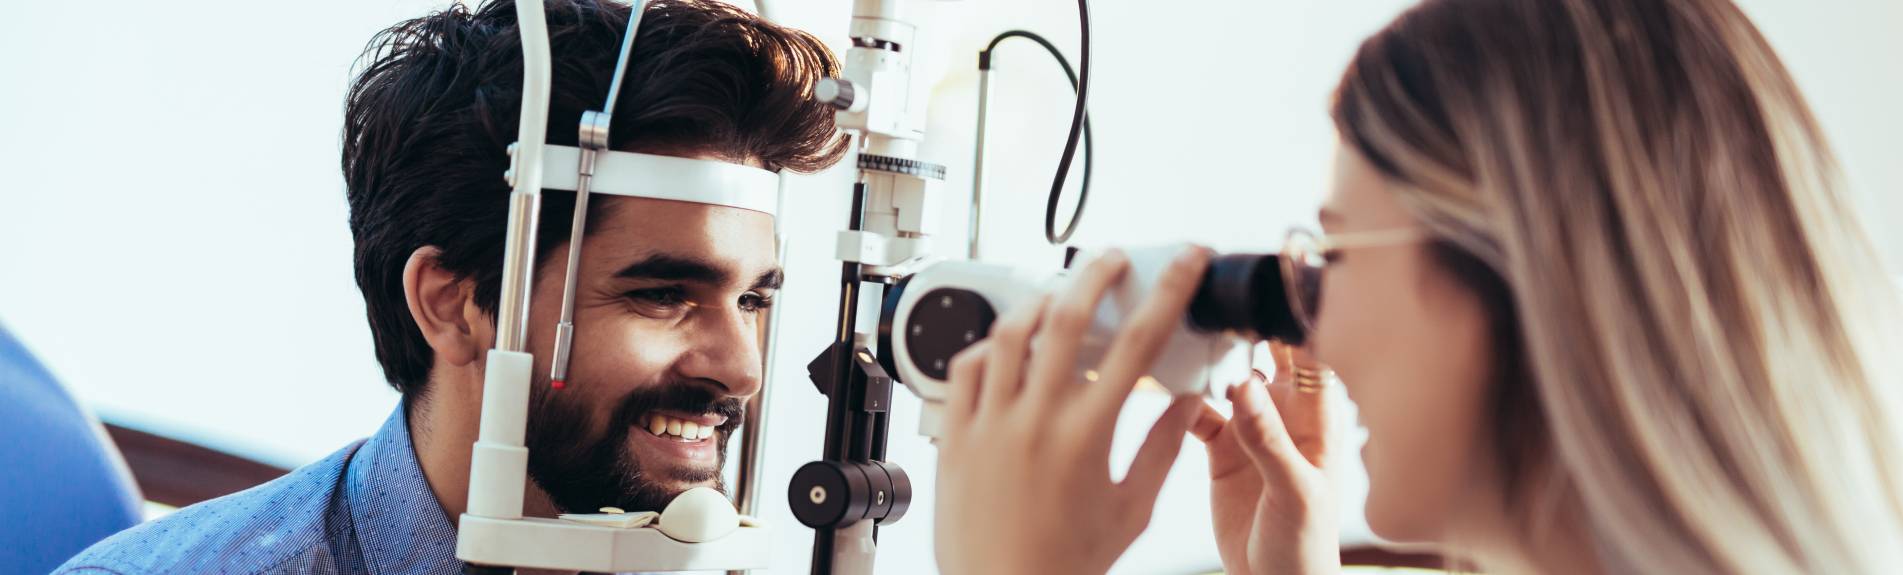 5 signs it’s time for an eye exam